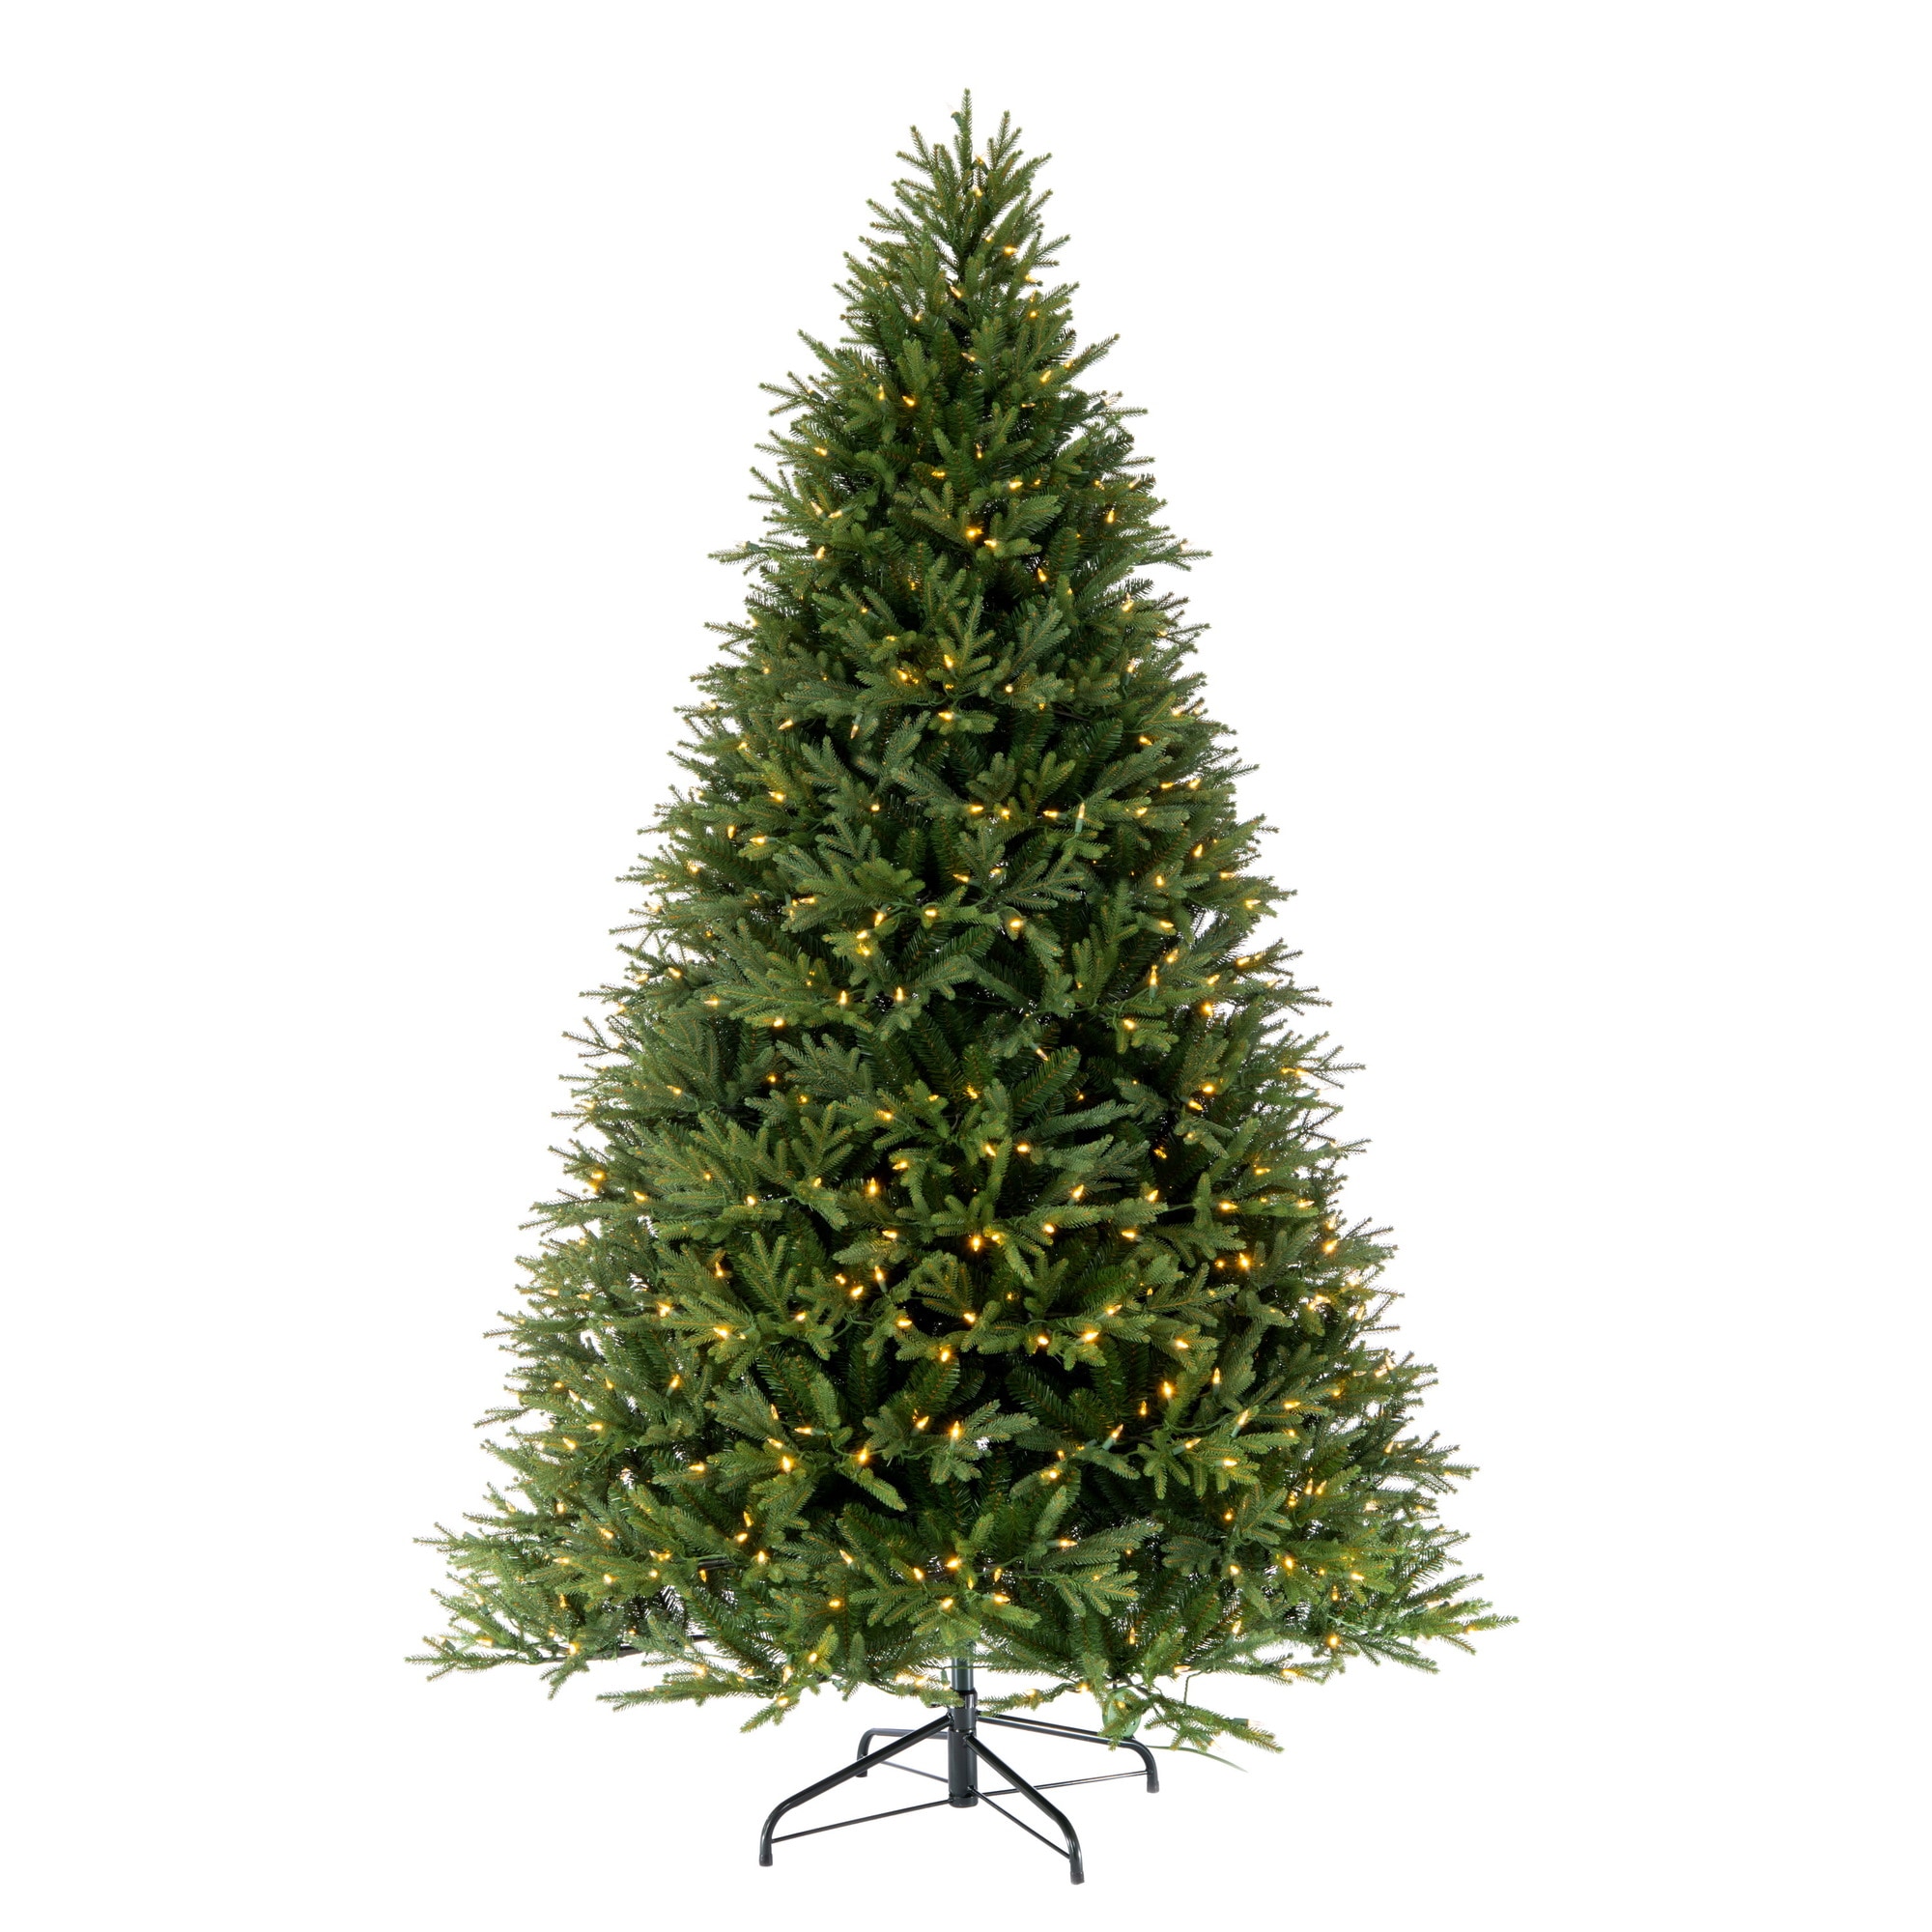 WELLFOR 6-ft Pine Pre-lit Purple Artificial Christmas Tree with